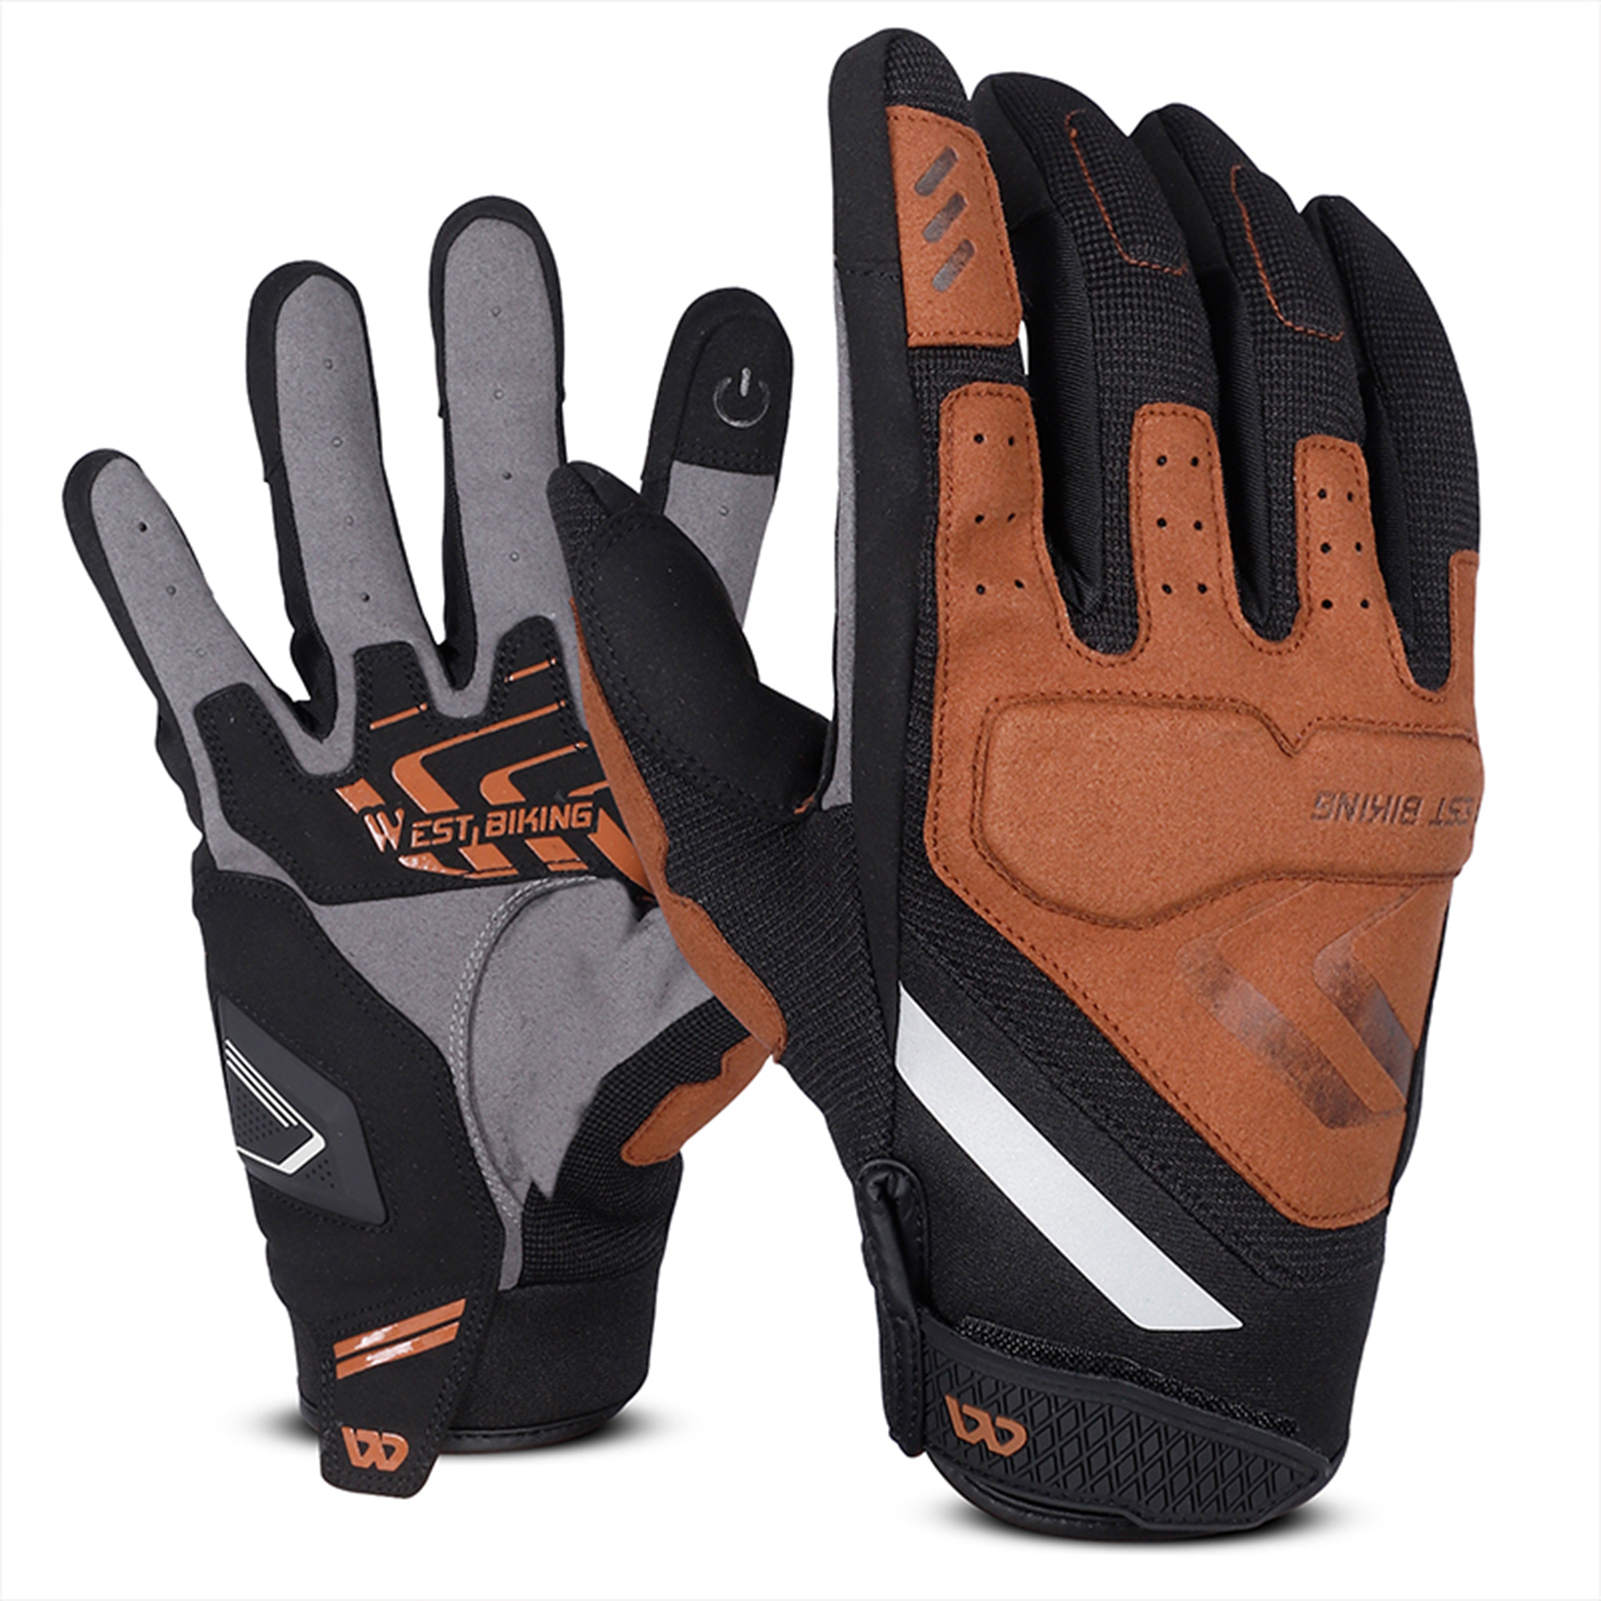 1 Pair WESTBIKING Riding Gloves Breathable Shatter